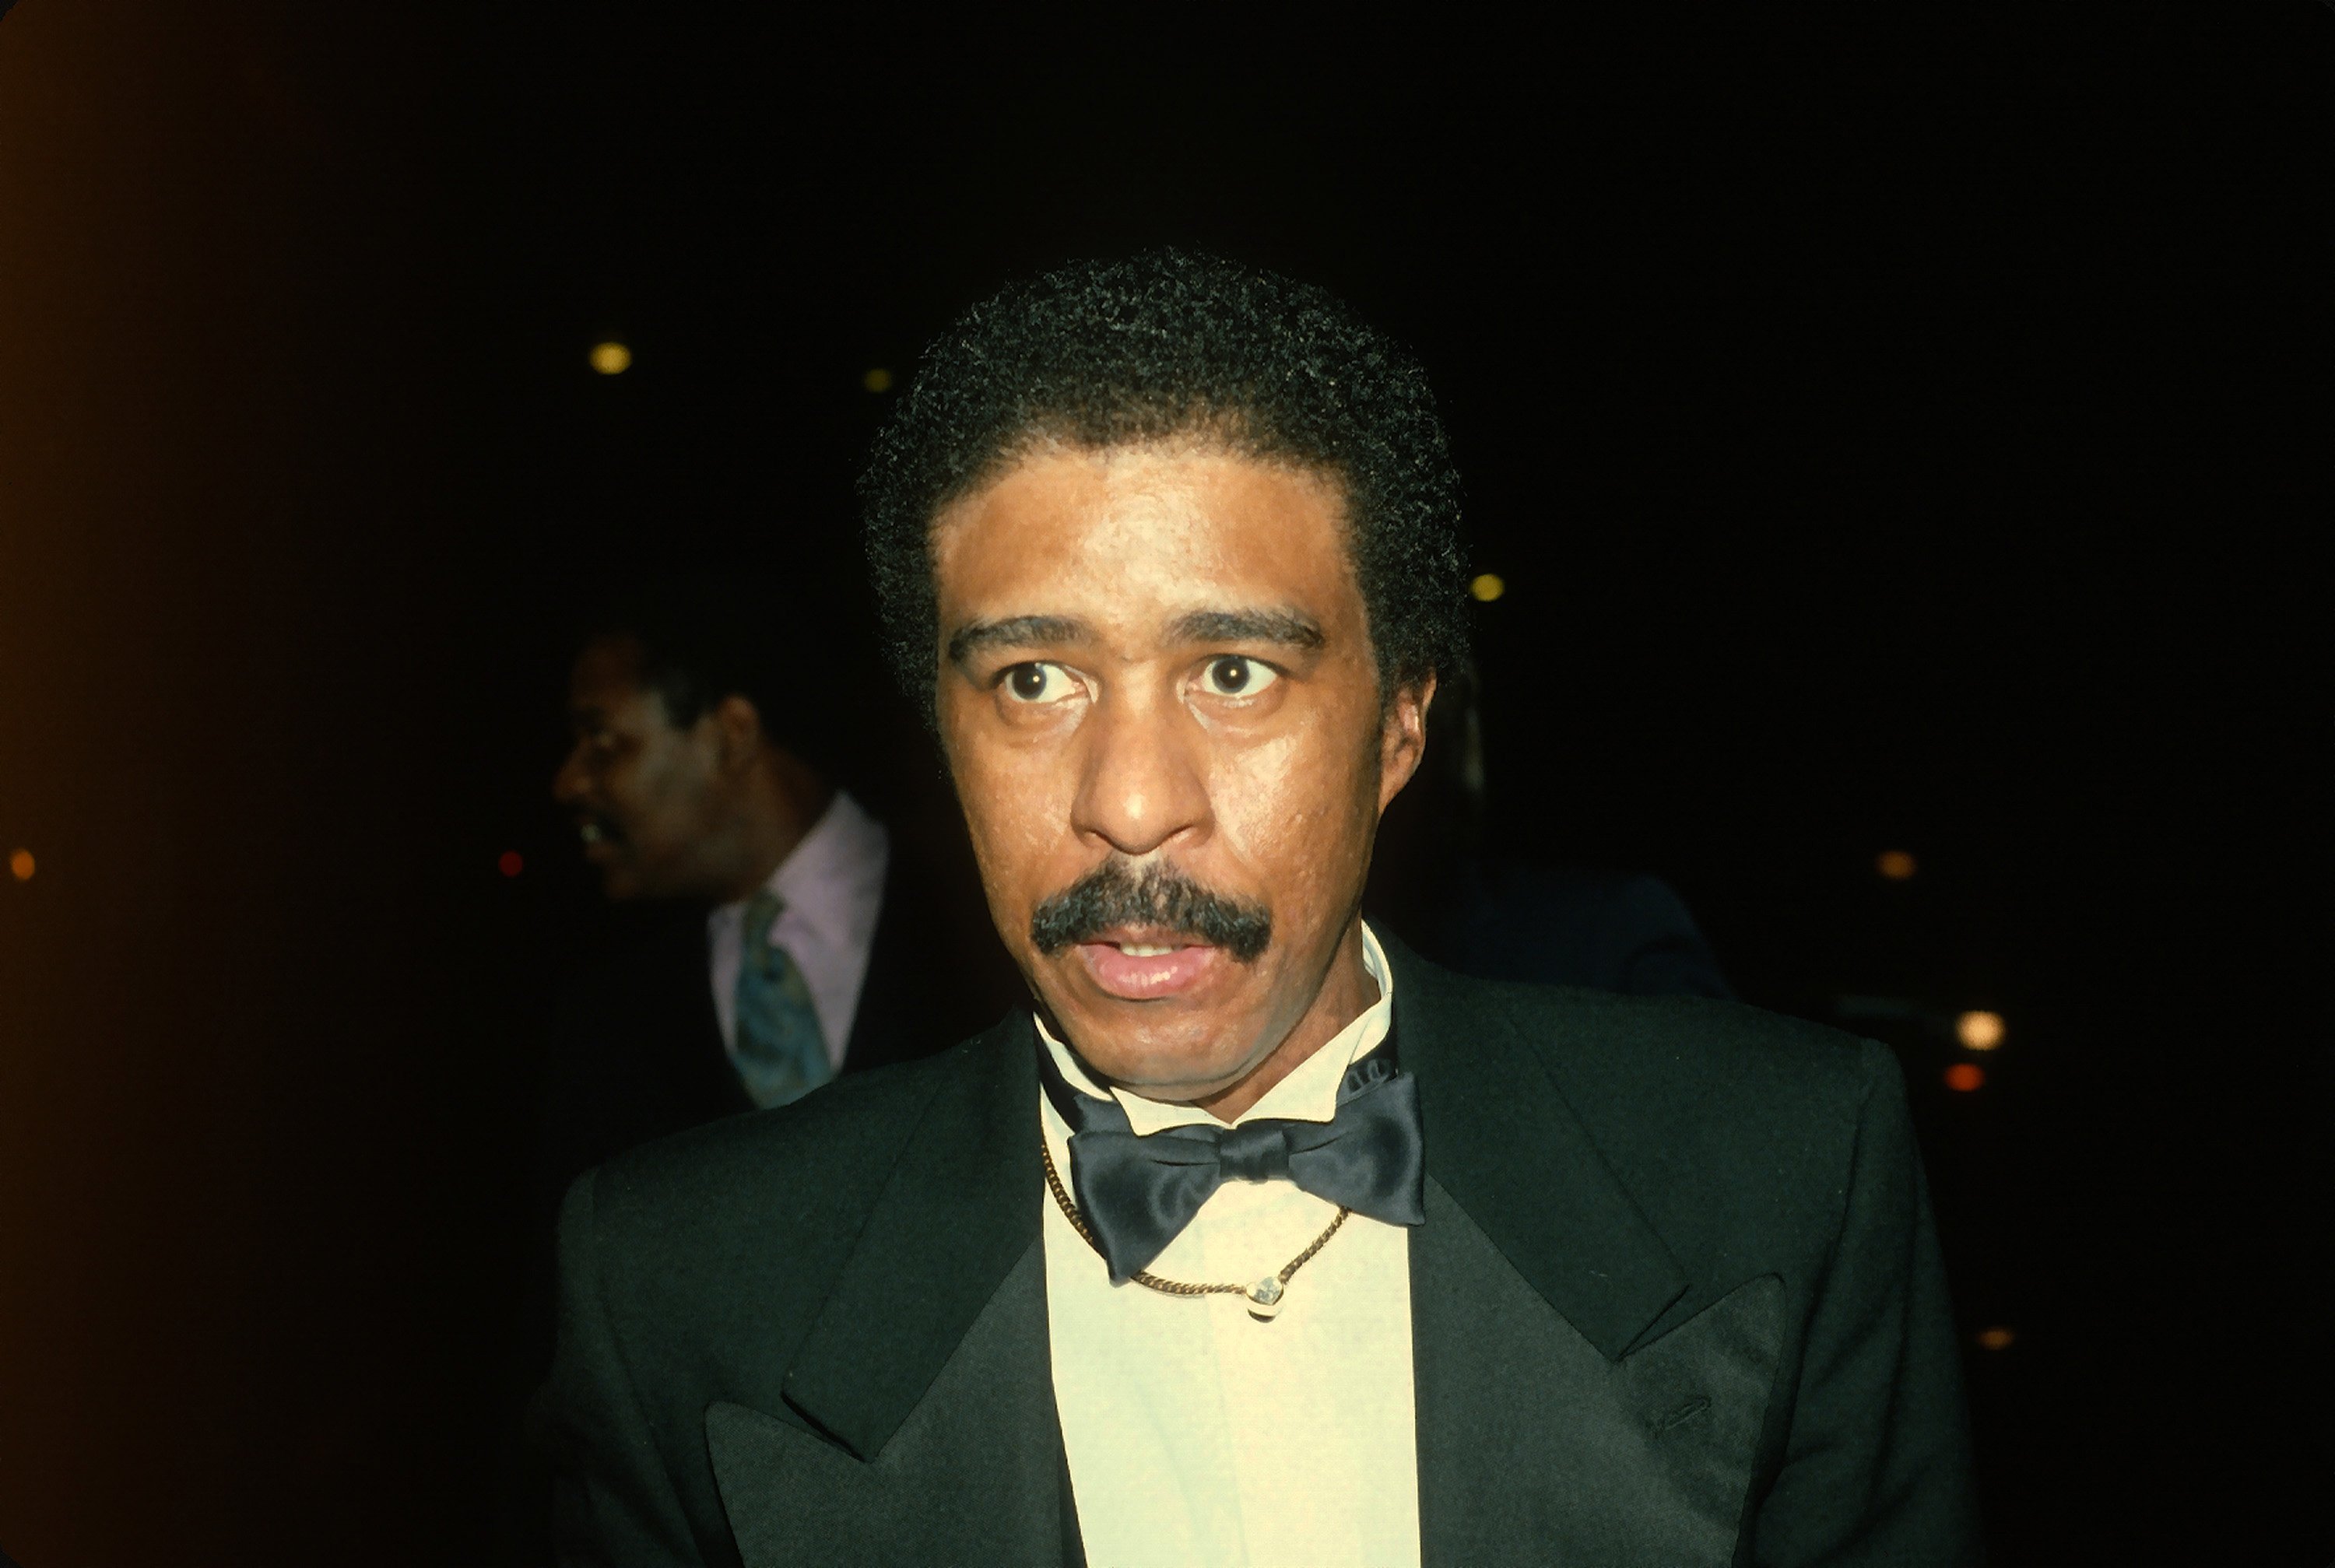 Richard Pryor is photographed at 'Night of 100 Stars' event in New York City March 8, 1982. | Photo: Getty Images